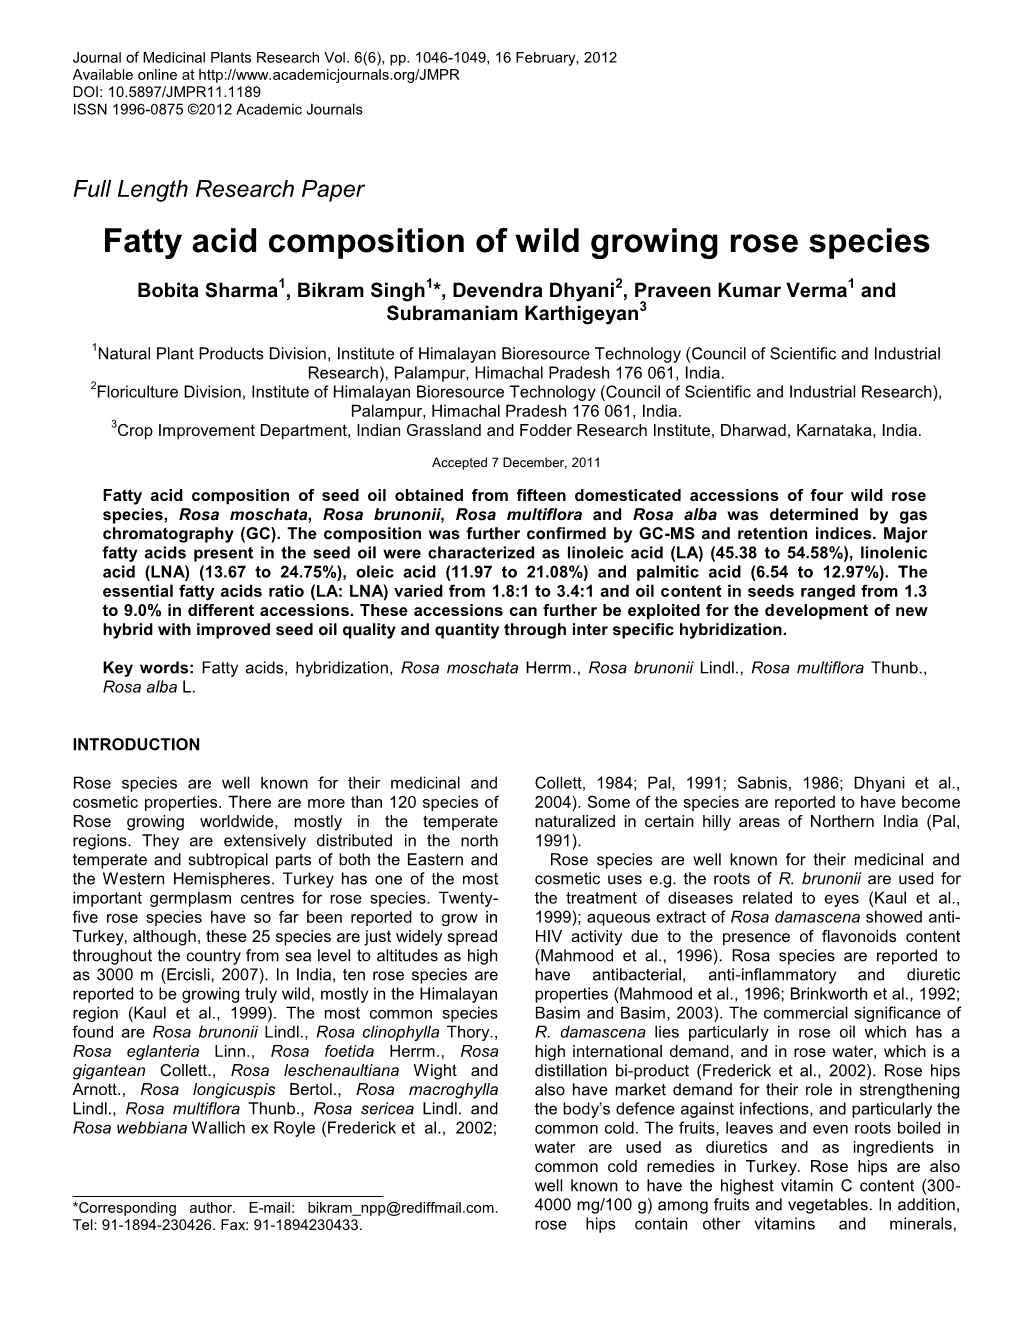 Fatty Acid Composition of Wild Growing Rose Species